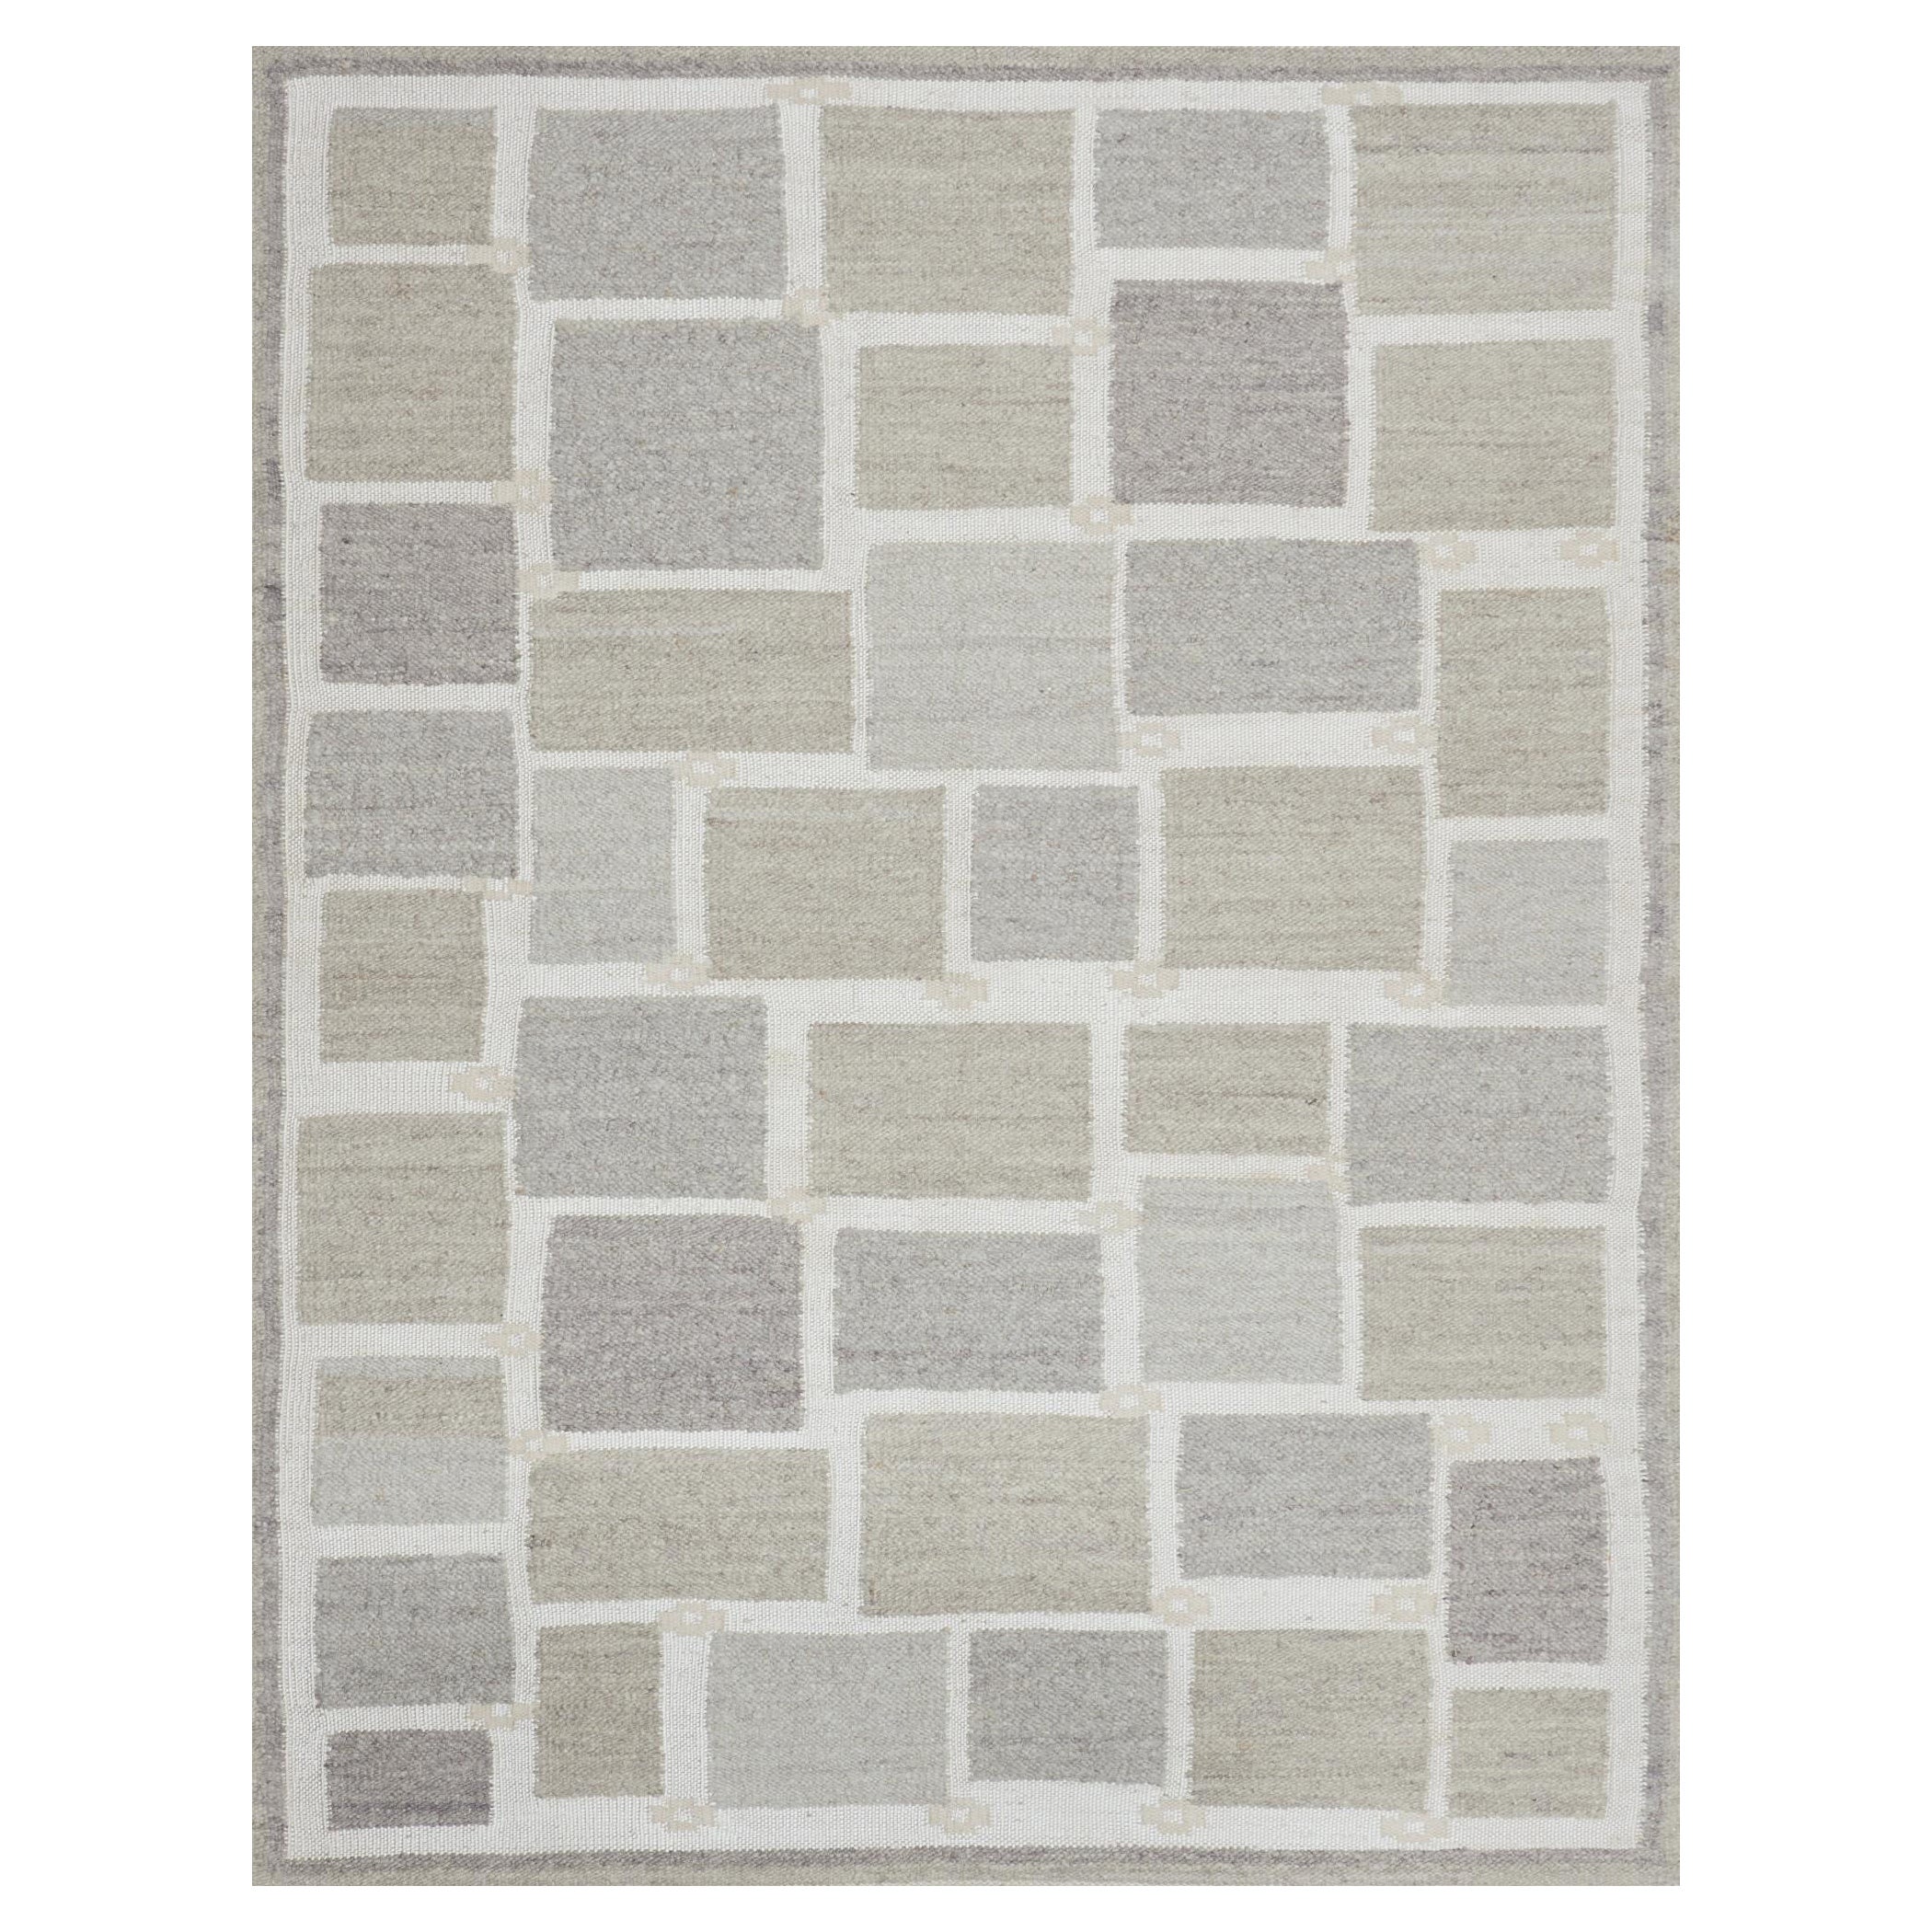 Swedish-Inspired Hand-made Contemporary Wool Flat-weave rug